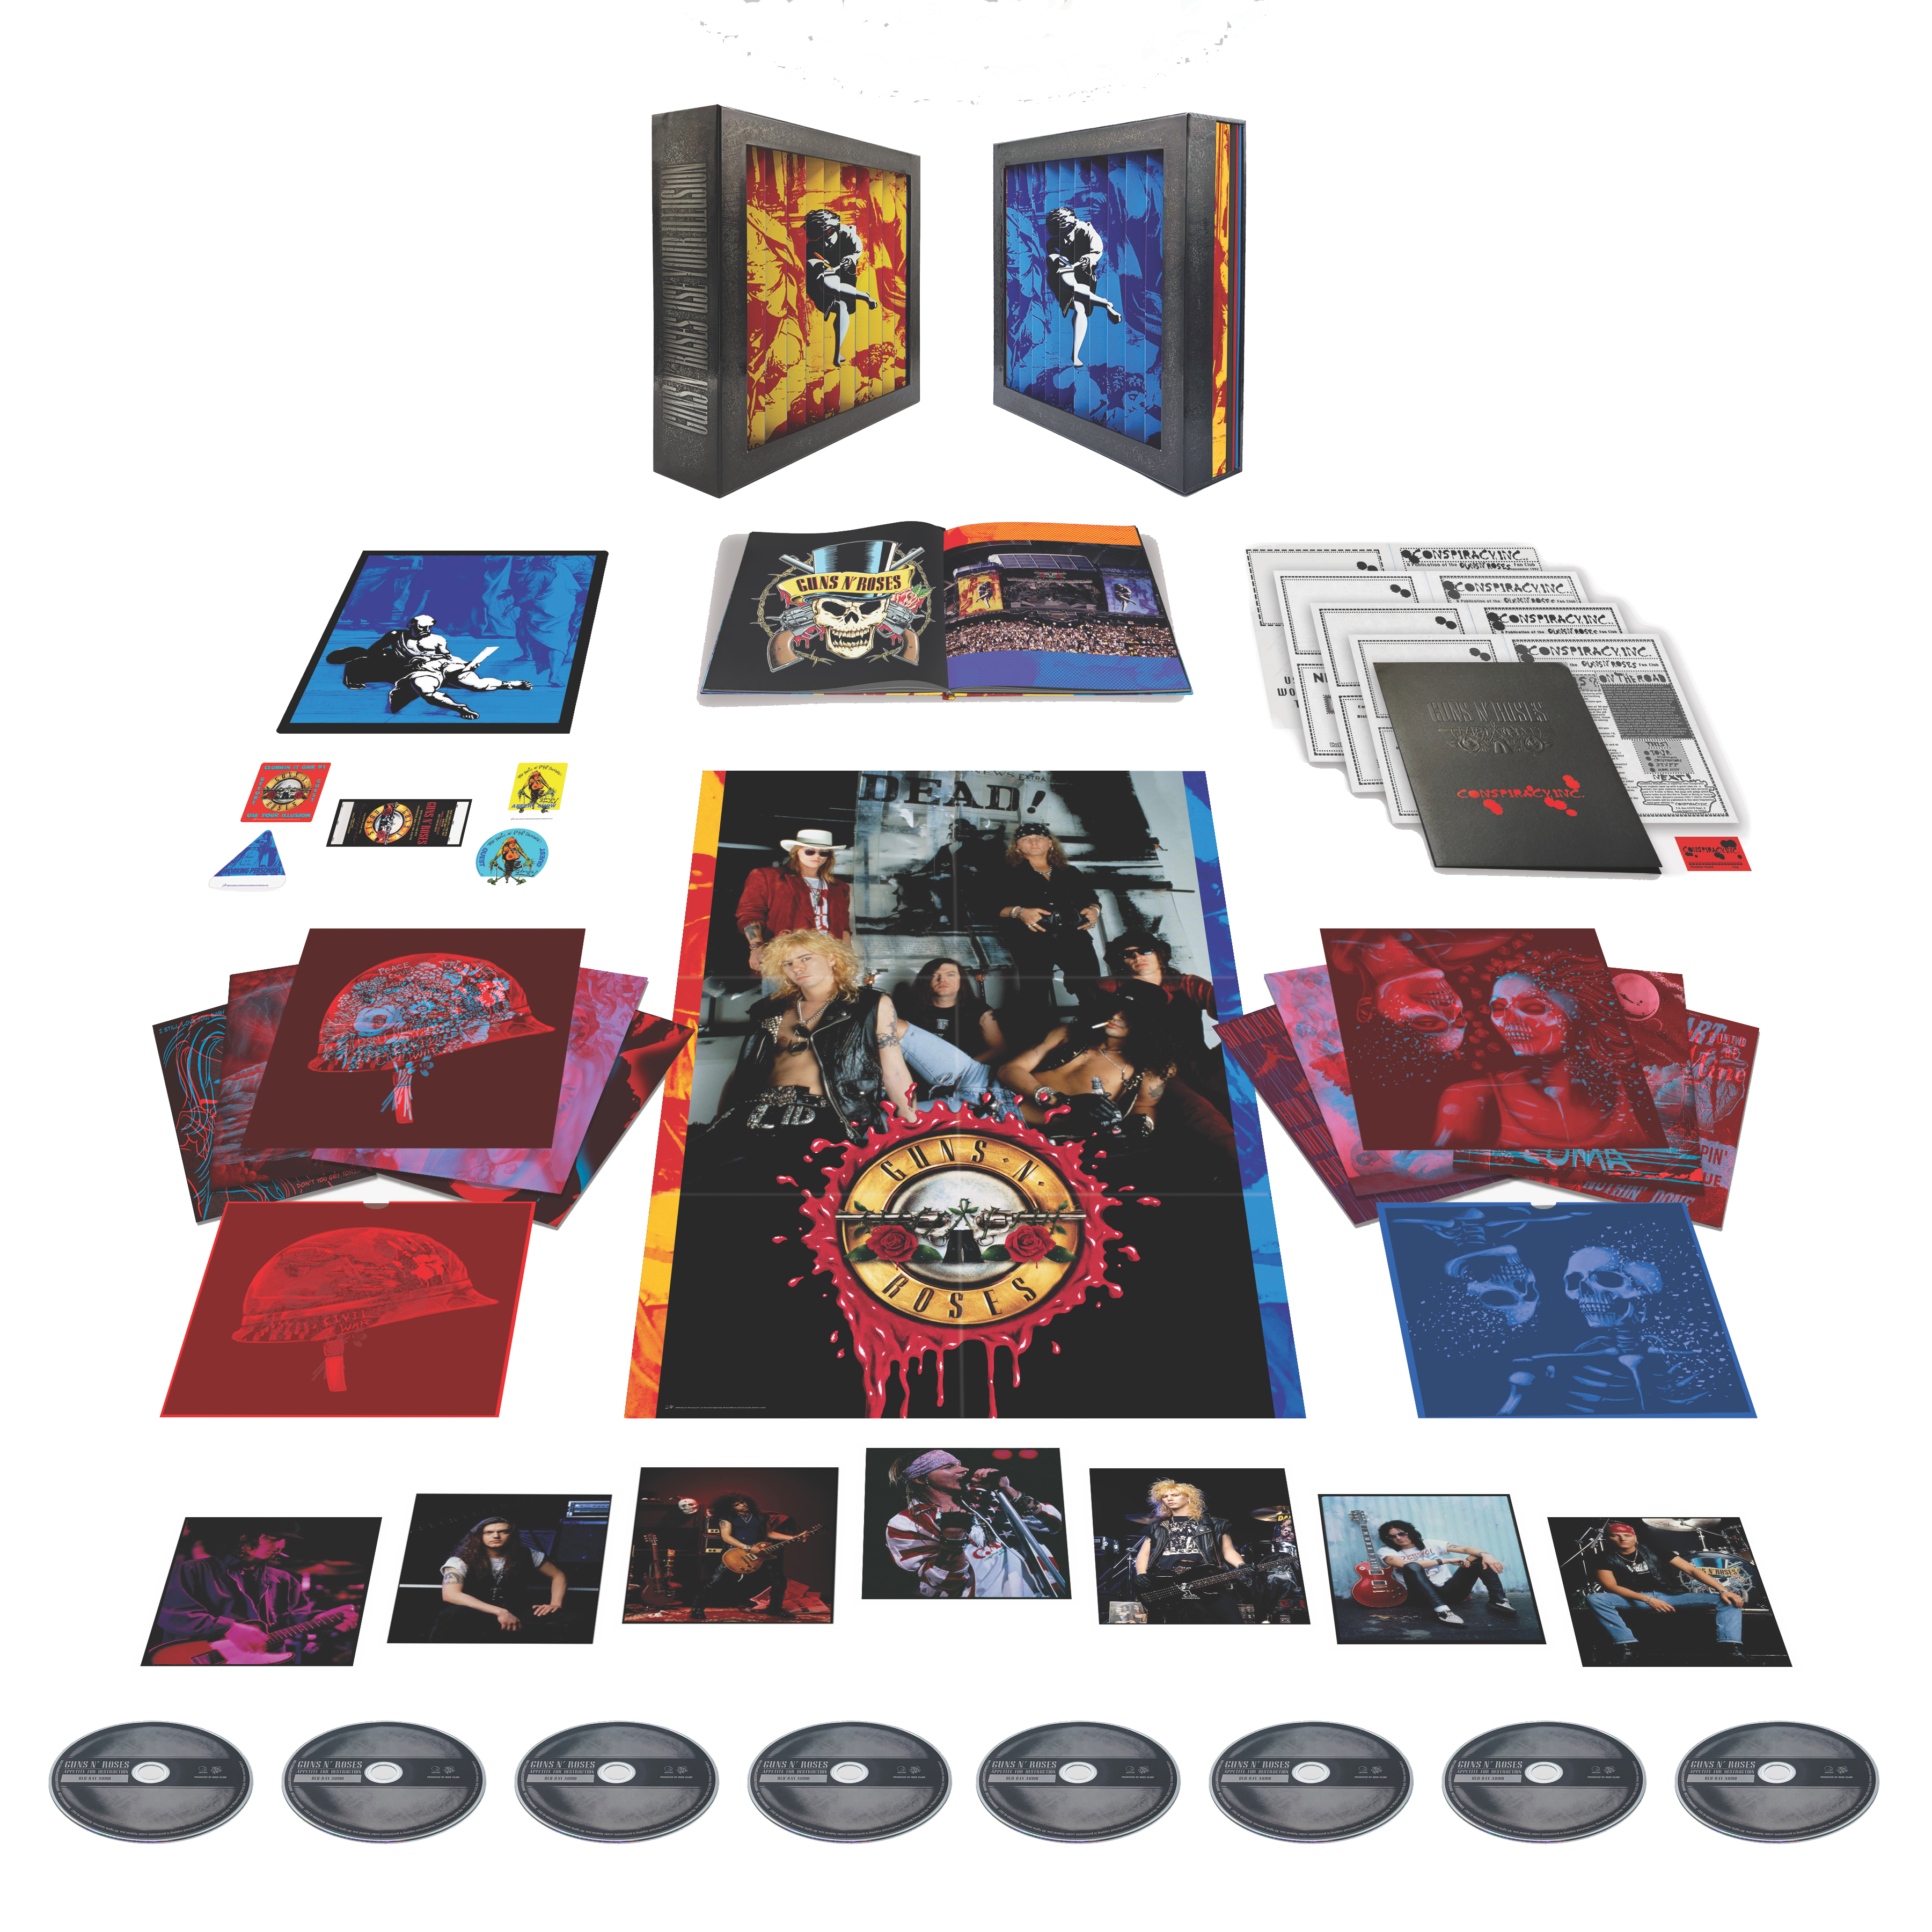 Guns N Roses - Use Your Illusion: Super Deluxe 7CD + Blu-Ray Box Set.